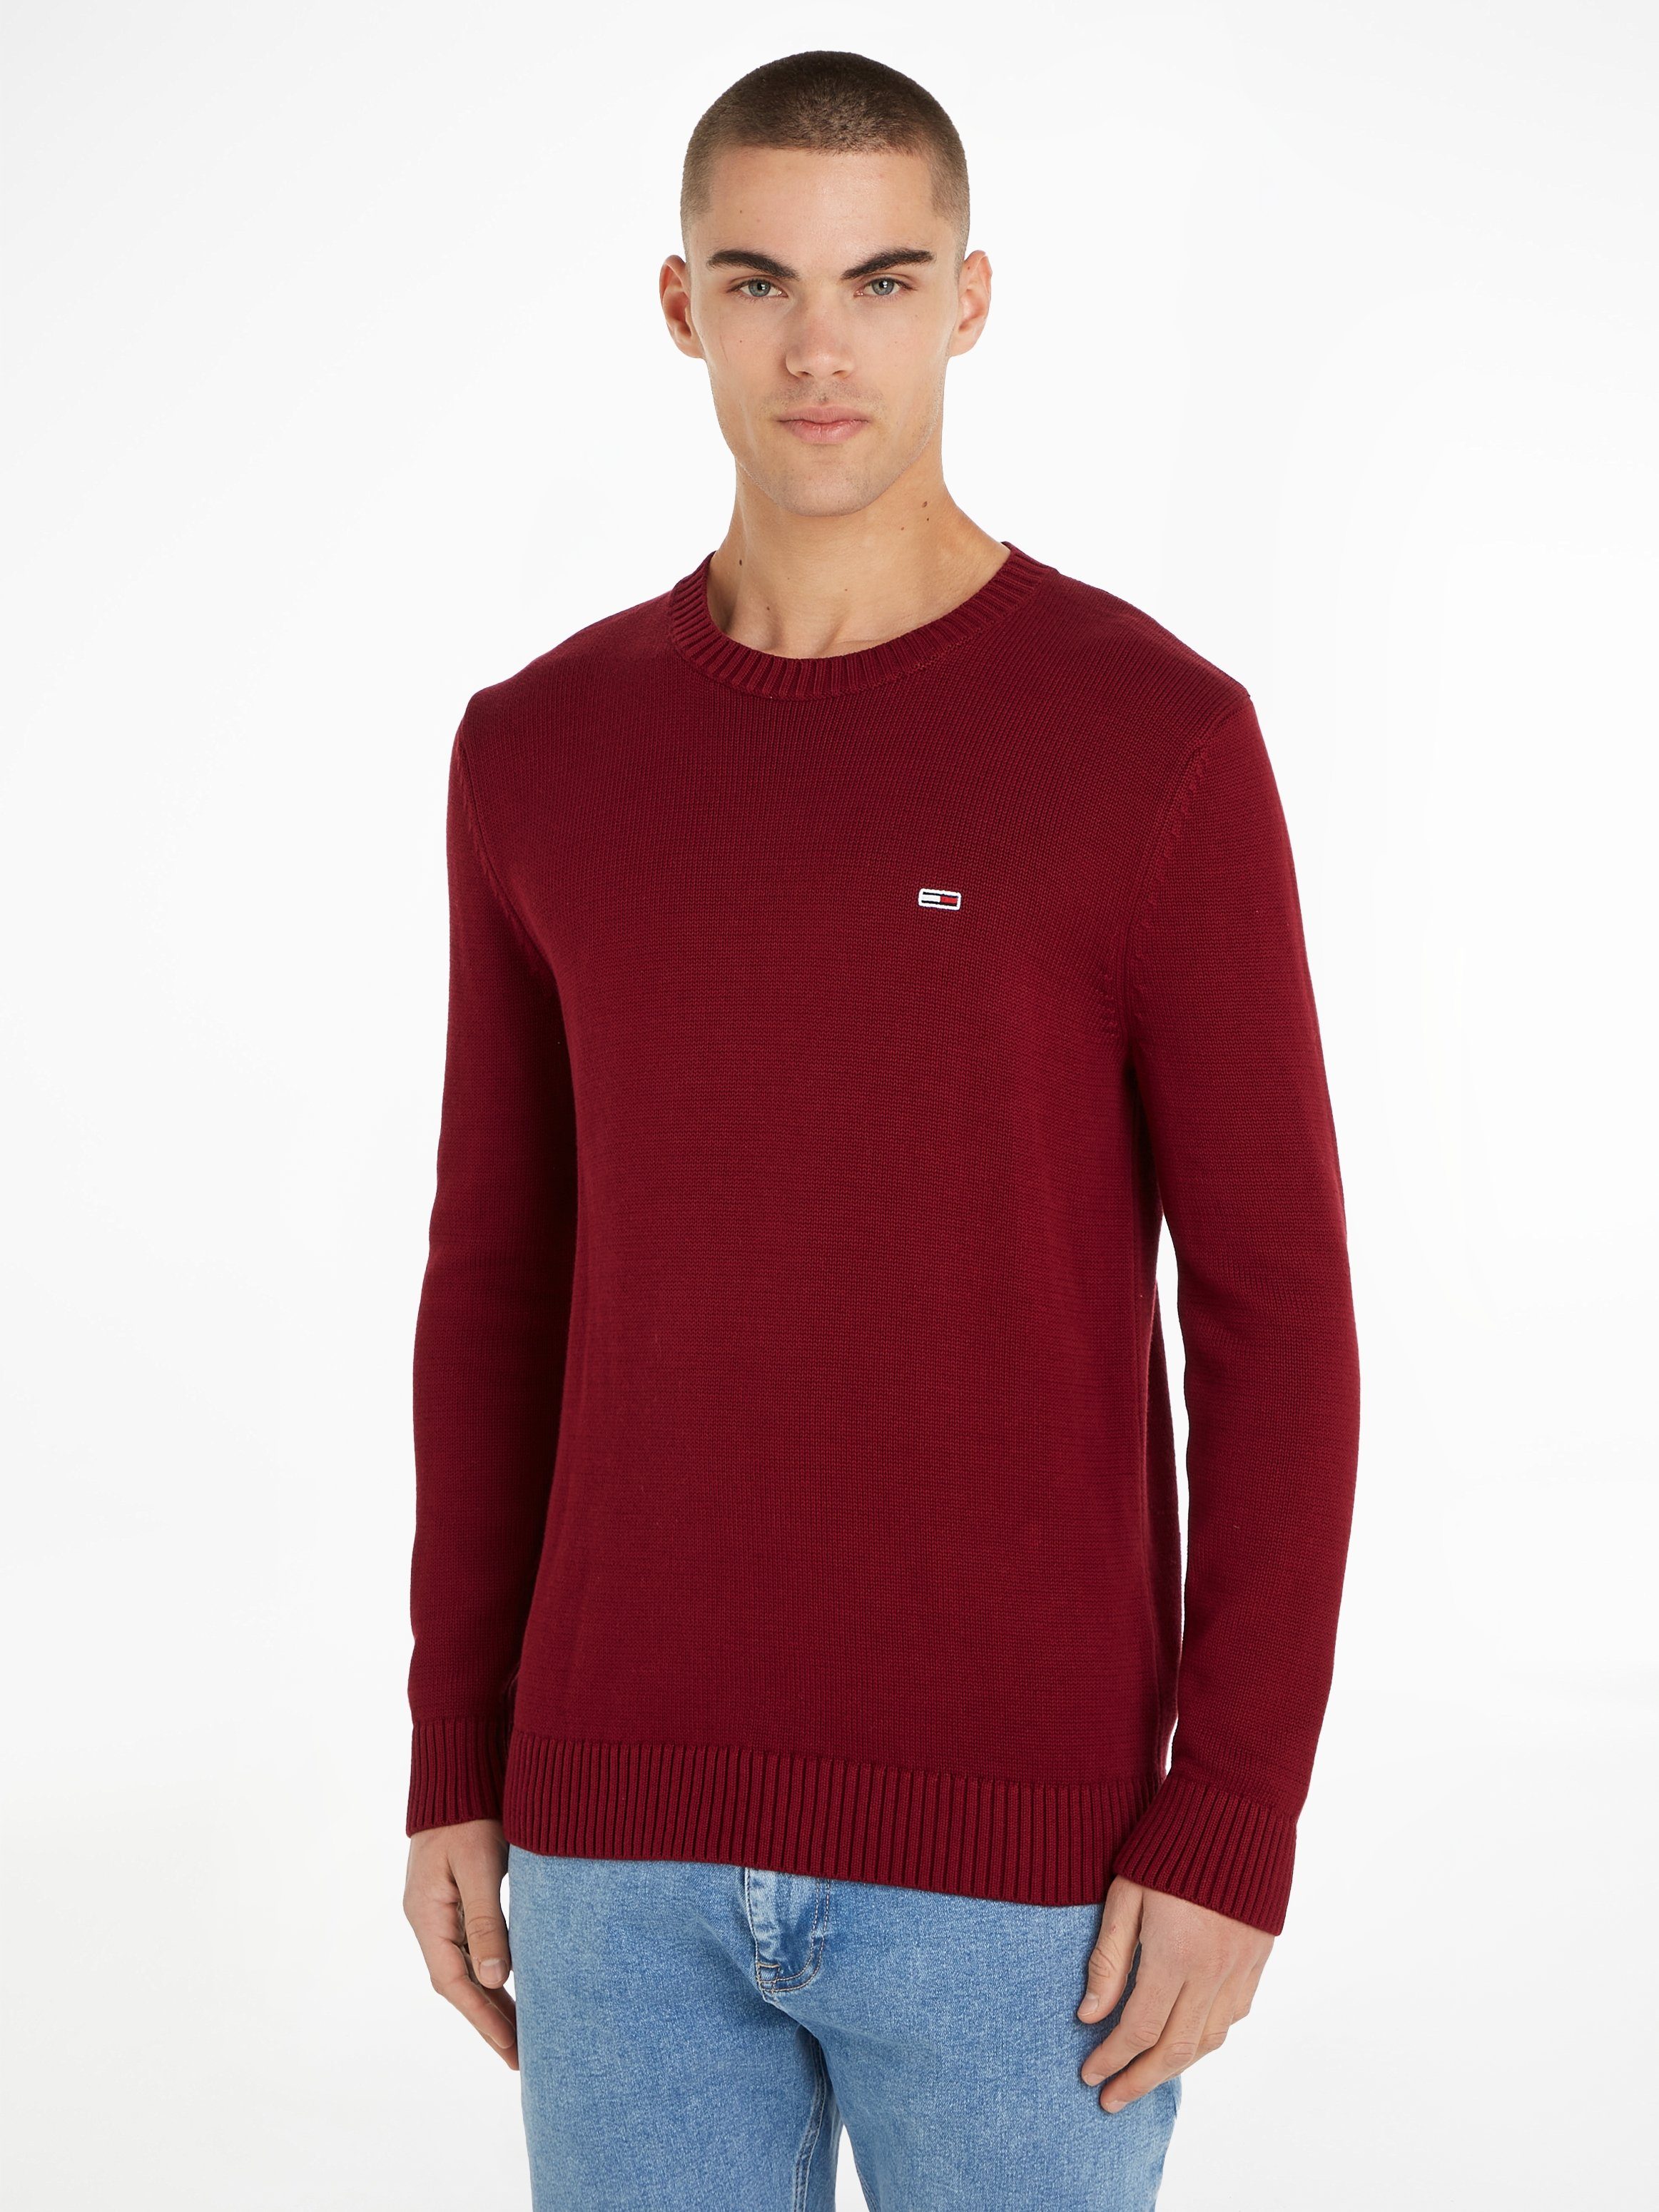 ESSENTIAL CREW Rouge SWEATER Strickpullover Jeans NECK Tommy TJM